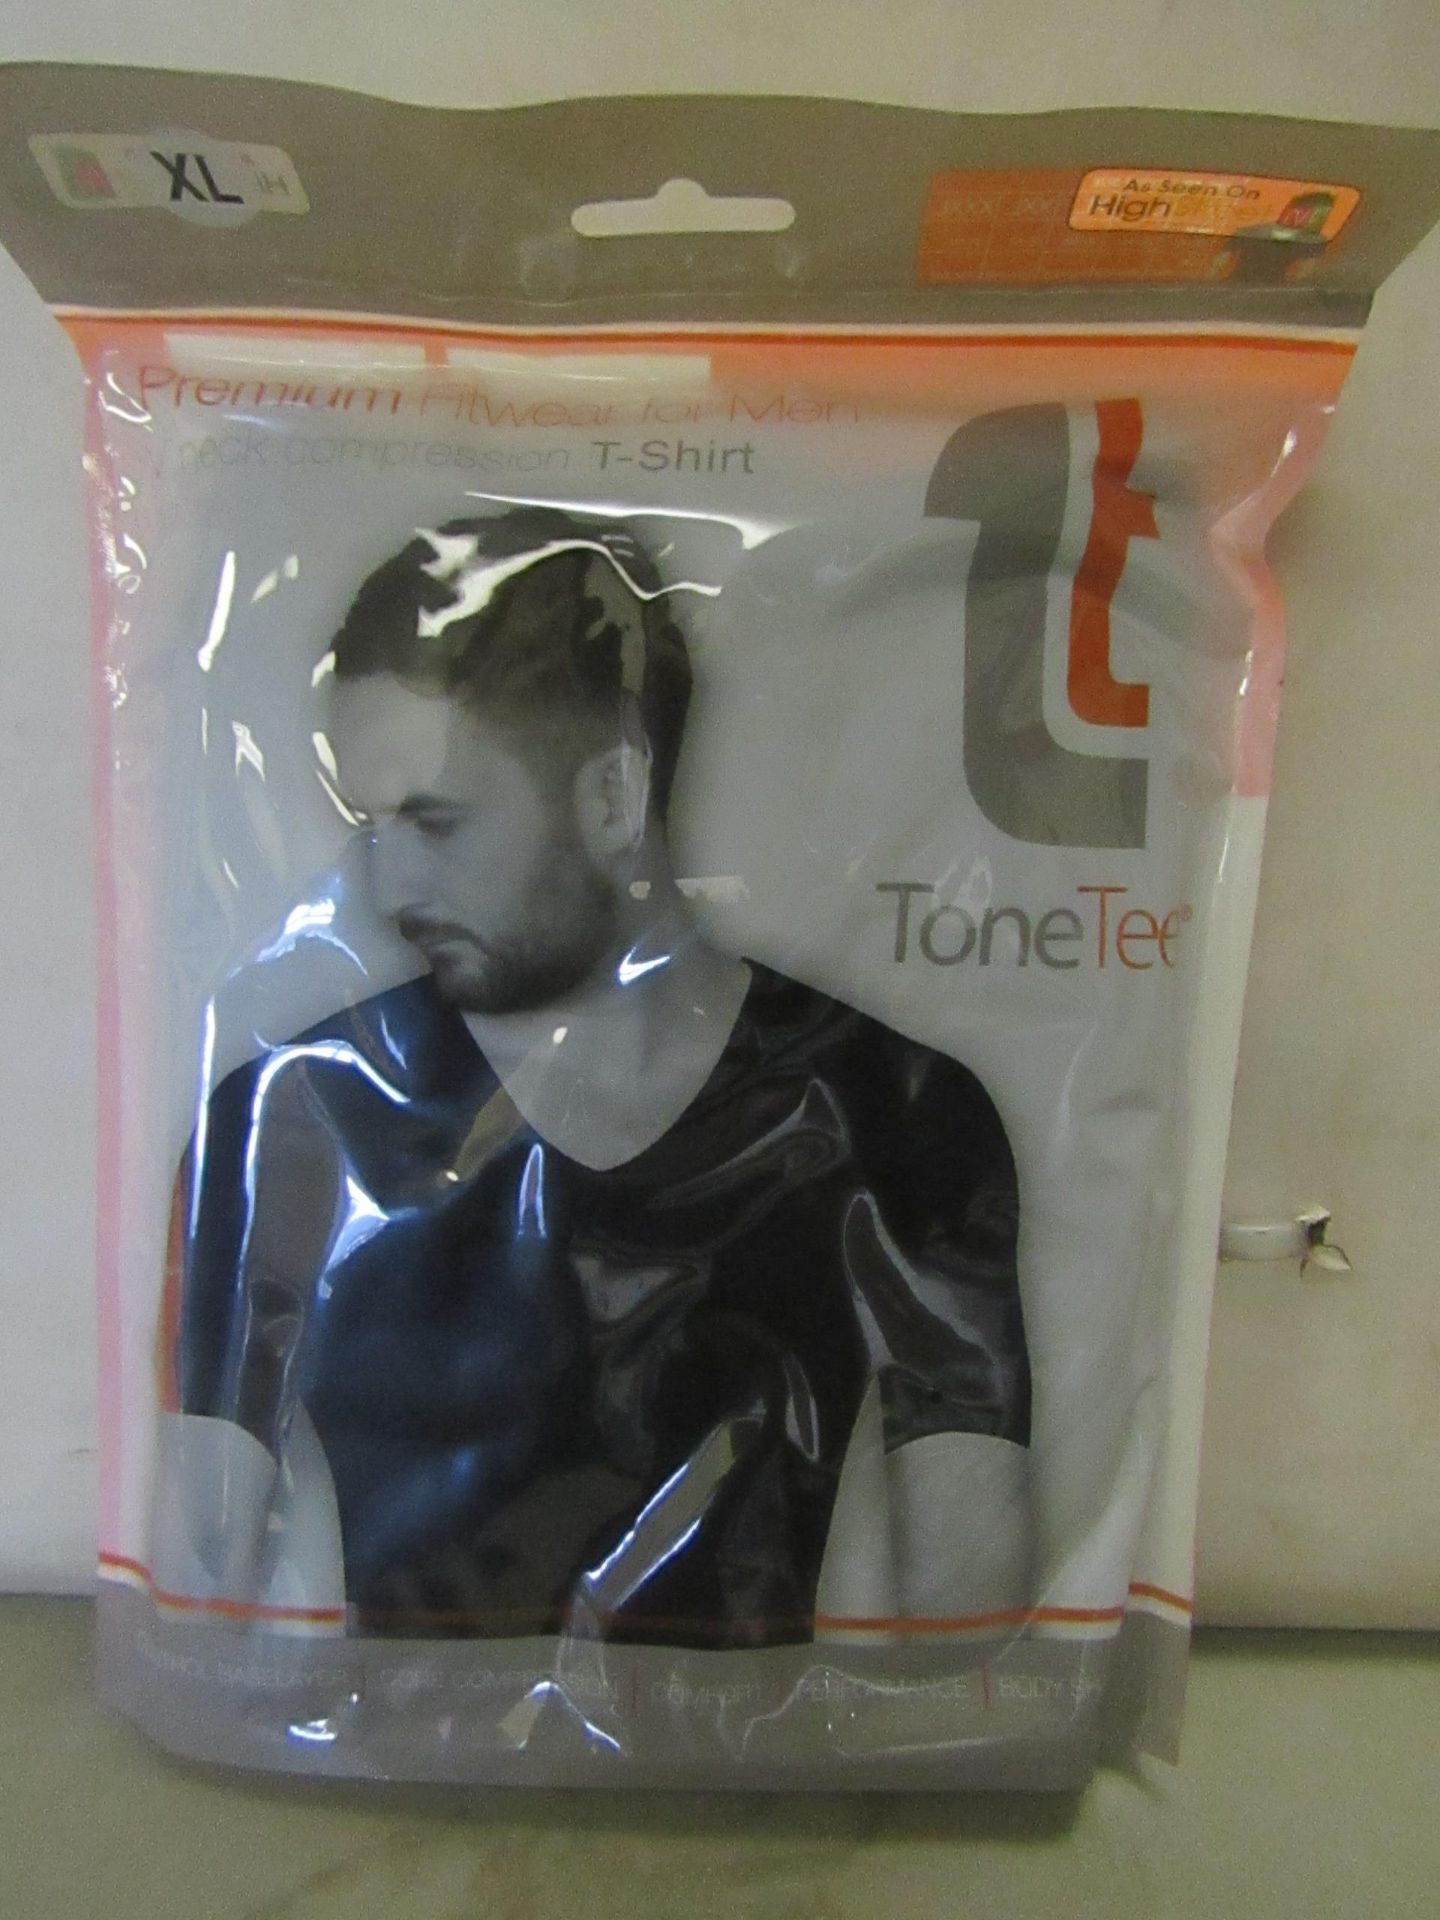 ToneTee v-Neck Compression T/Shirt Black Size X/L New & Packaged